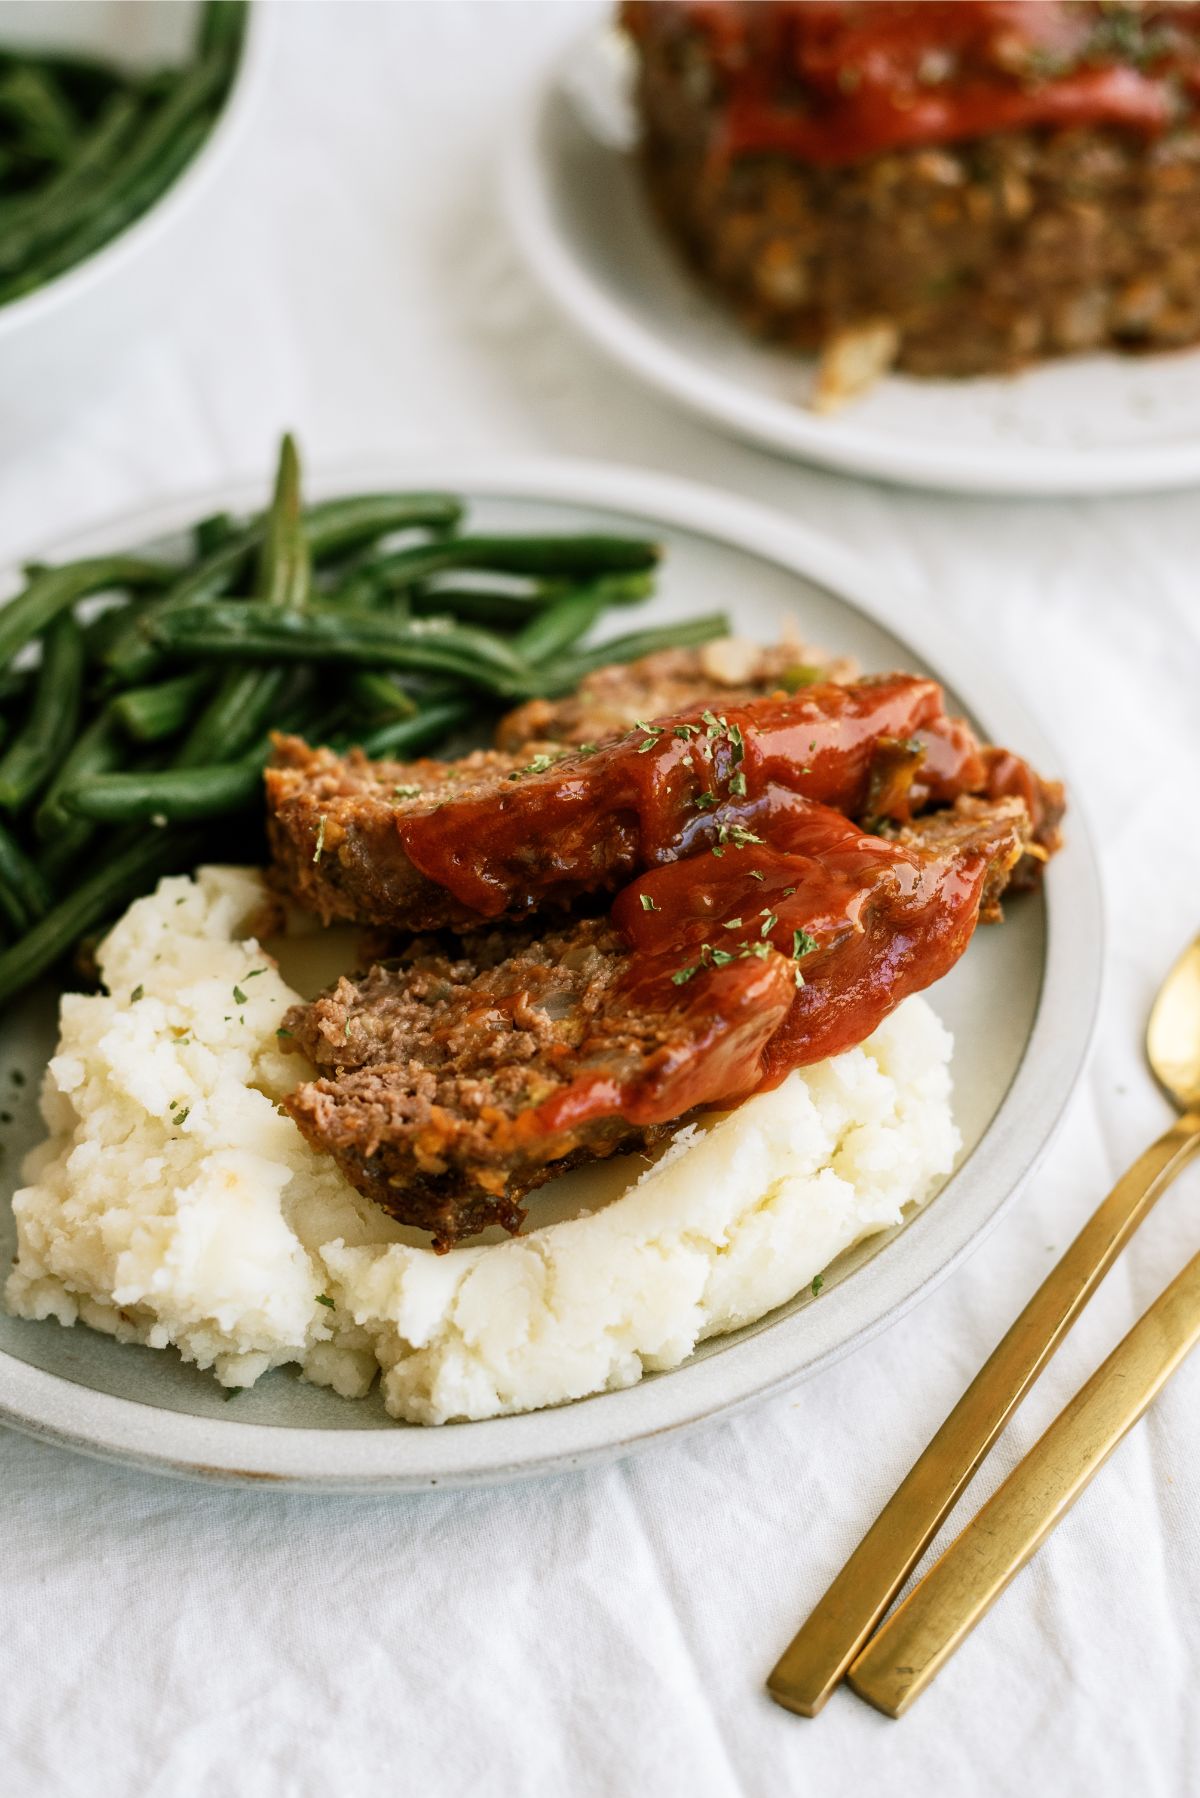 Slices of Cracker Barrel Meatloaf Copycat on a plate with potatoes and beans